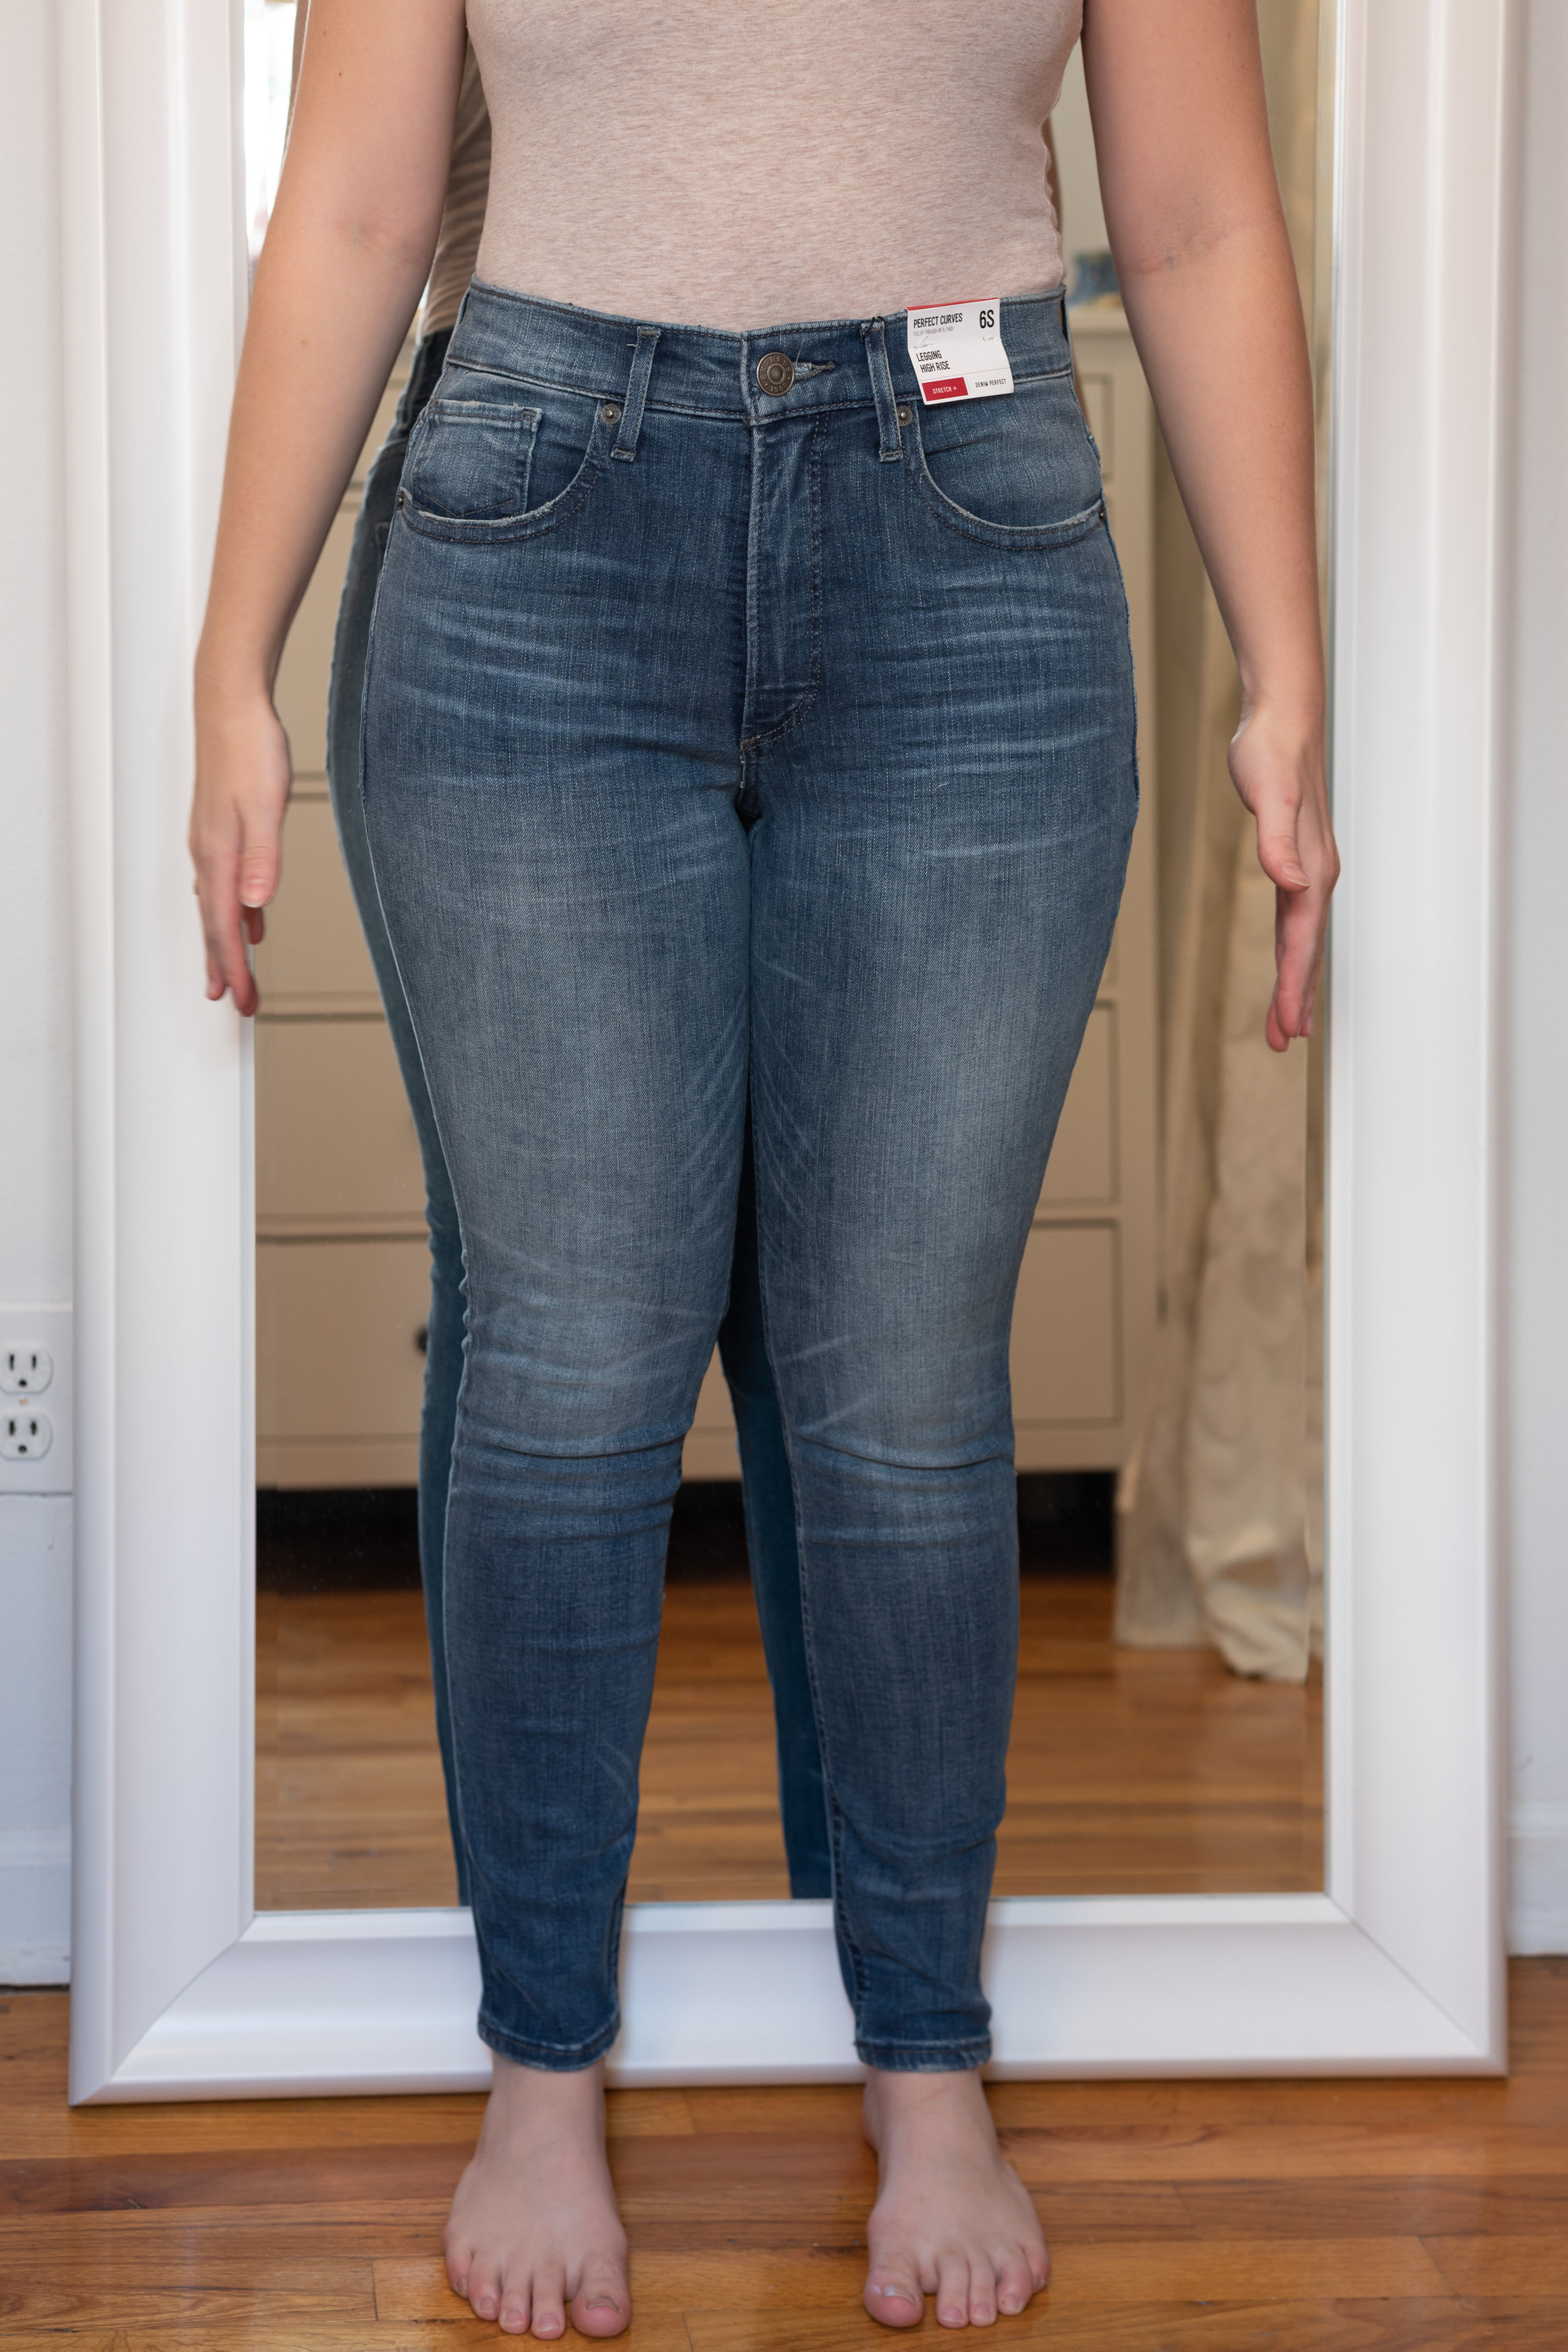 american eagle jeans true to size